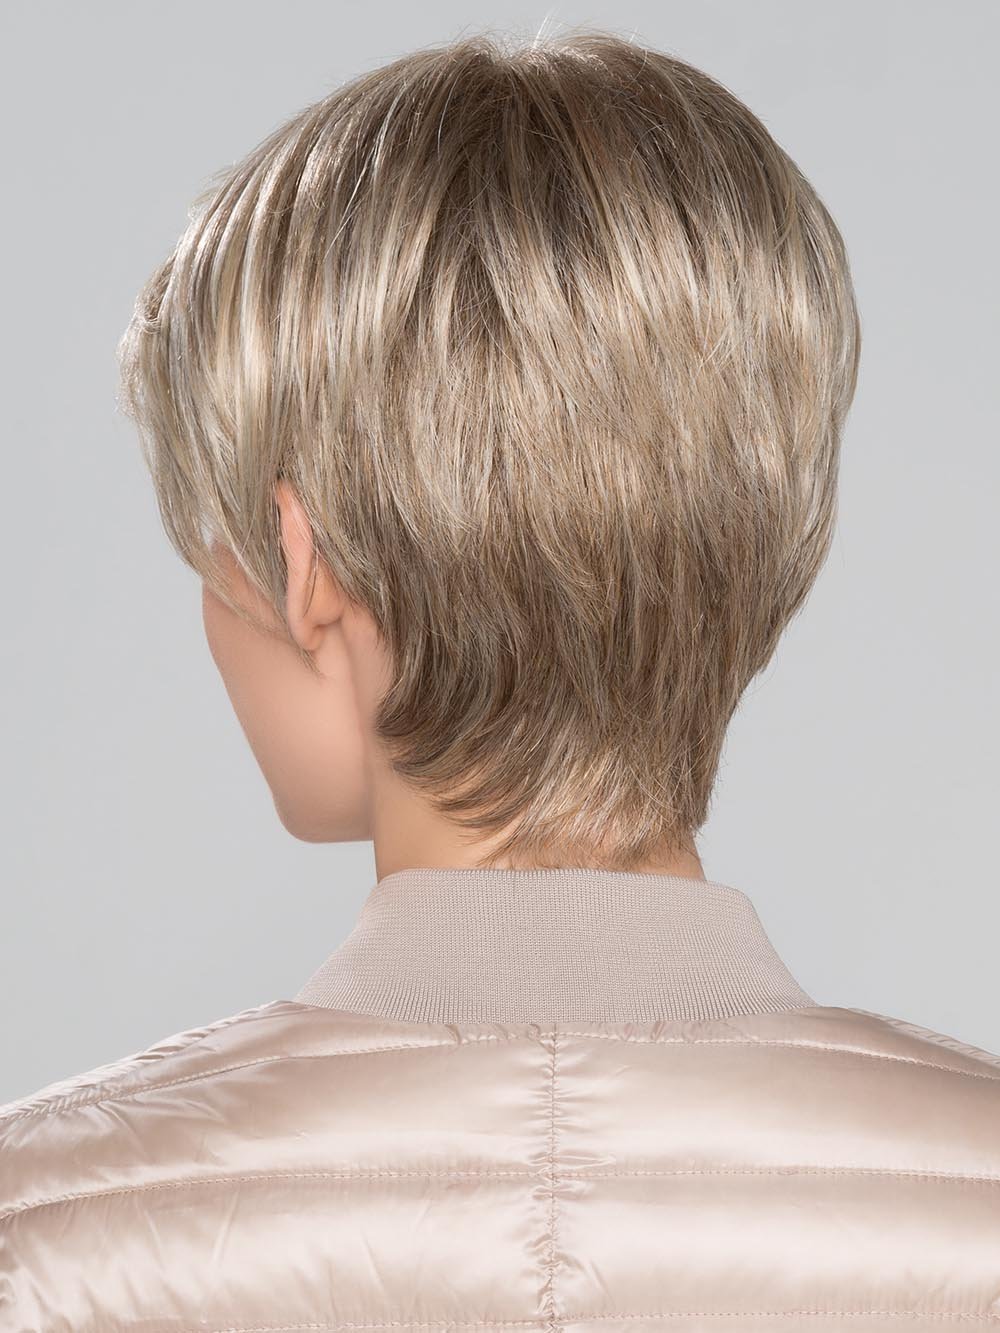 Refined and ultra-modern pixie crop that will turn heads wherever you go. The perfect look for day and night!